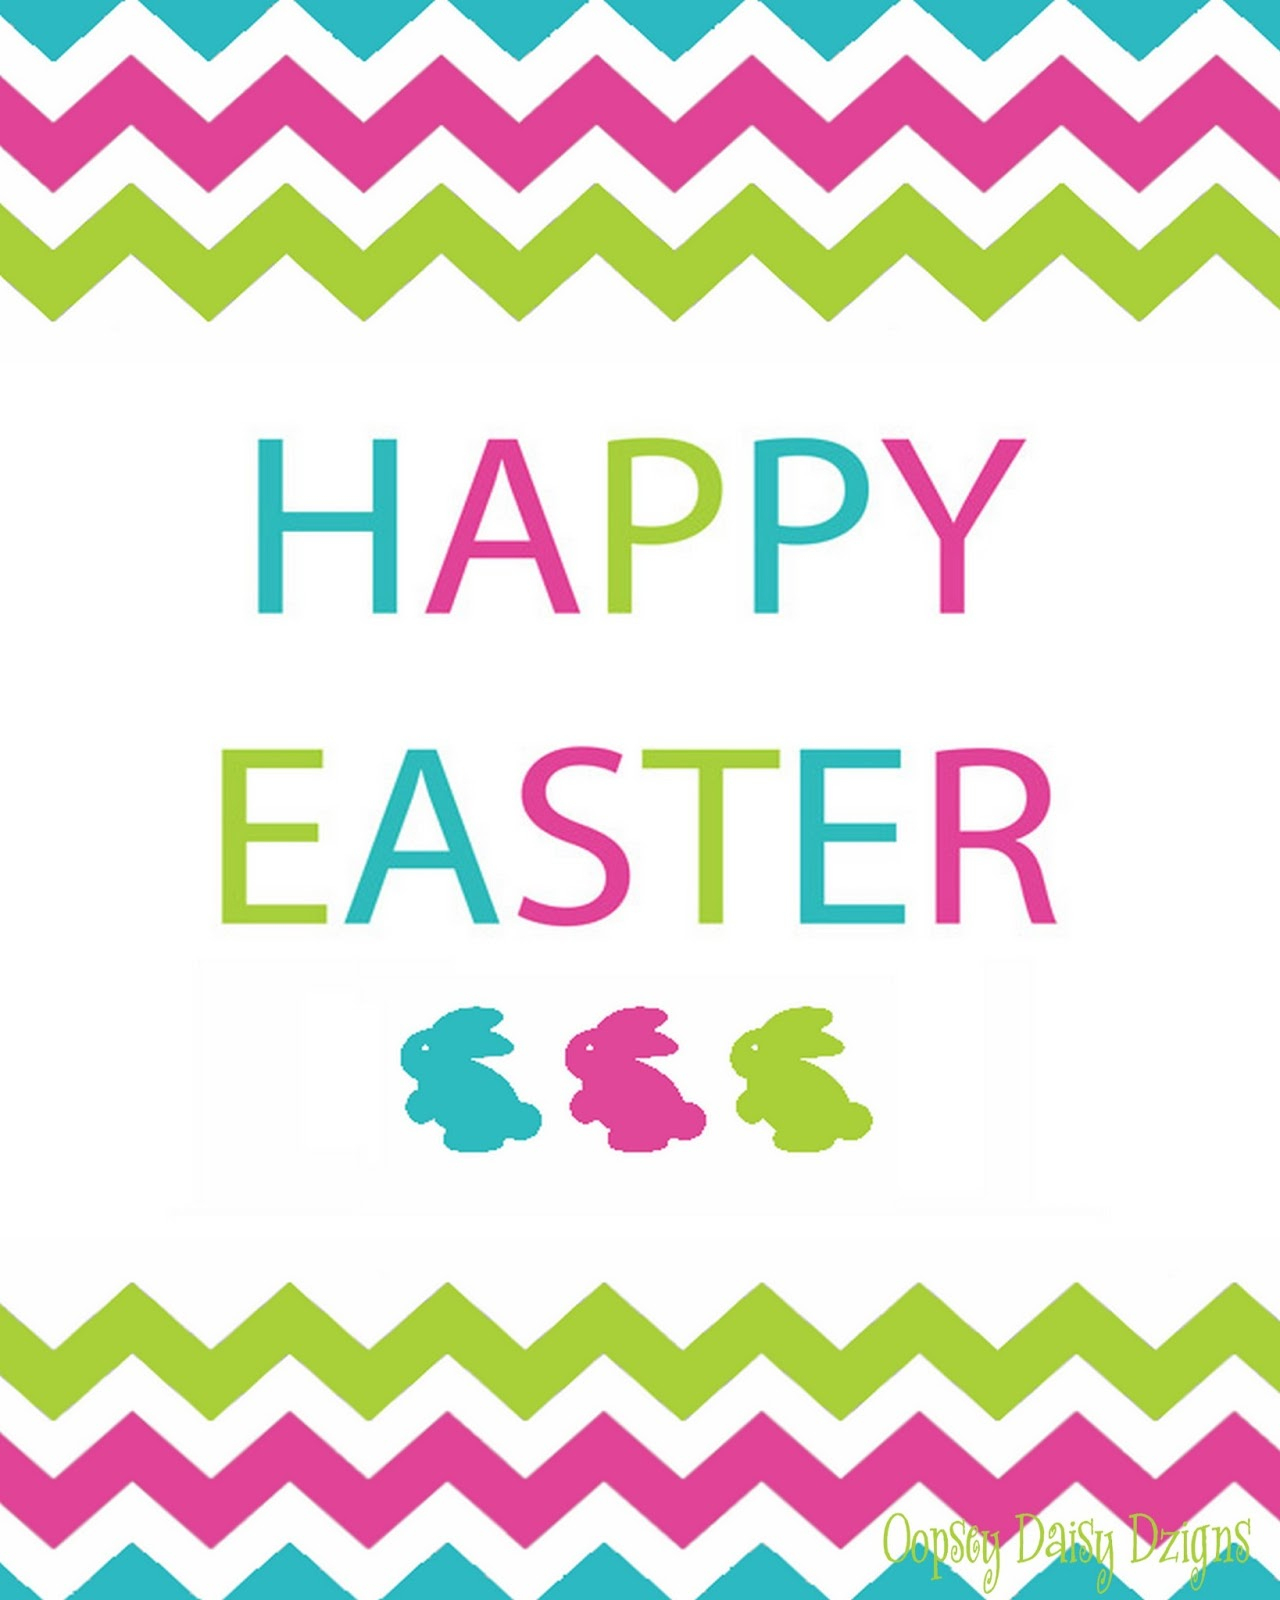 Free Printable Easter Cards To Colour In – Hd Easter Images - Free Printable Easter Cards